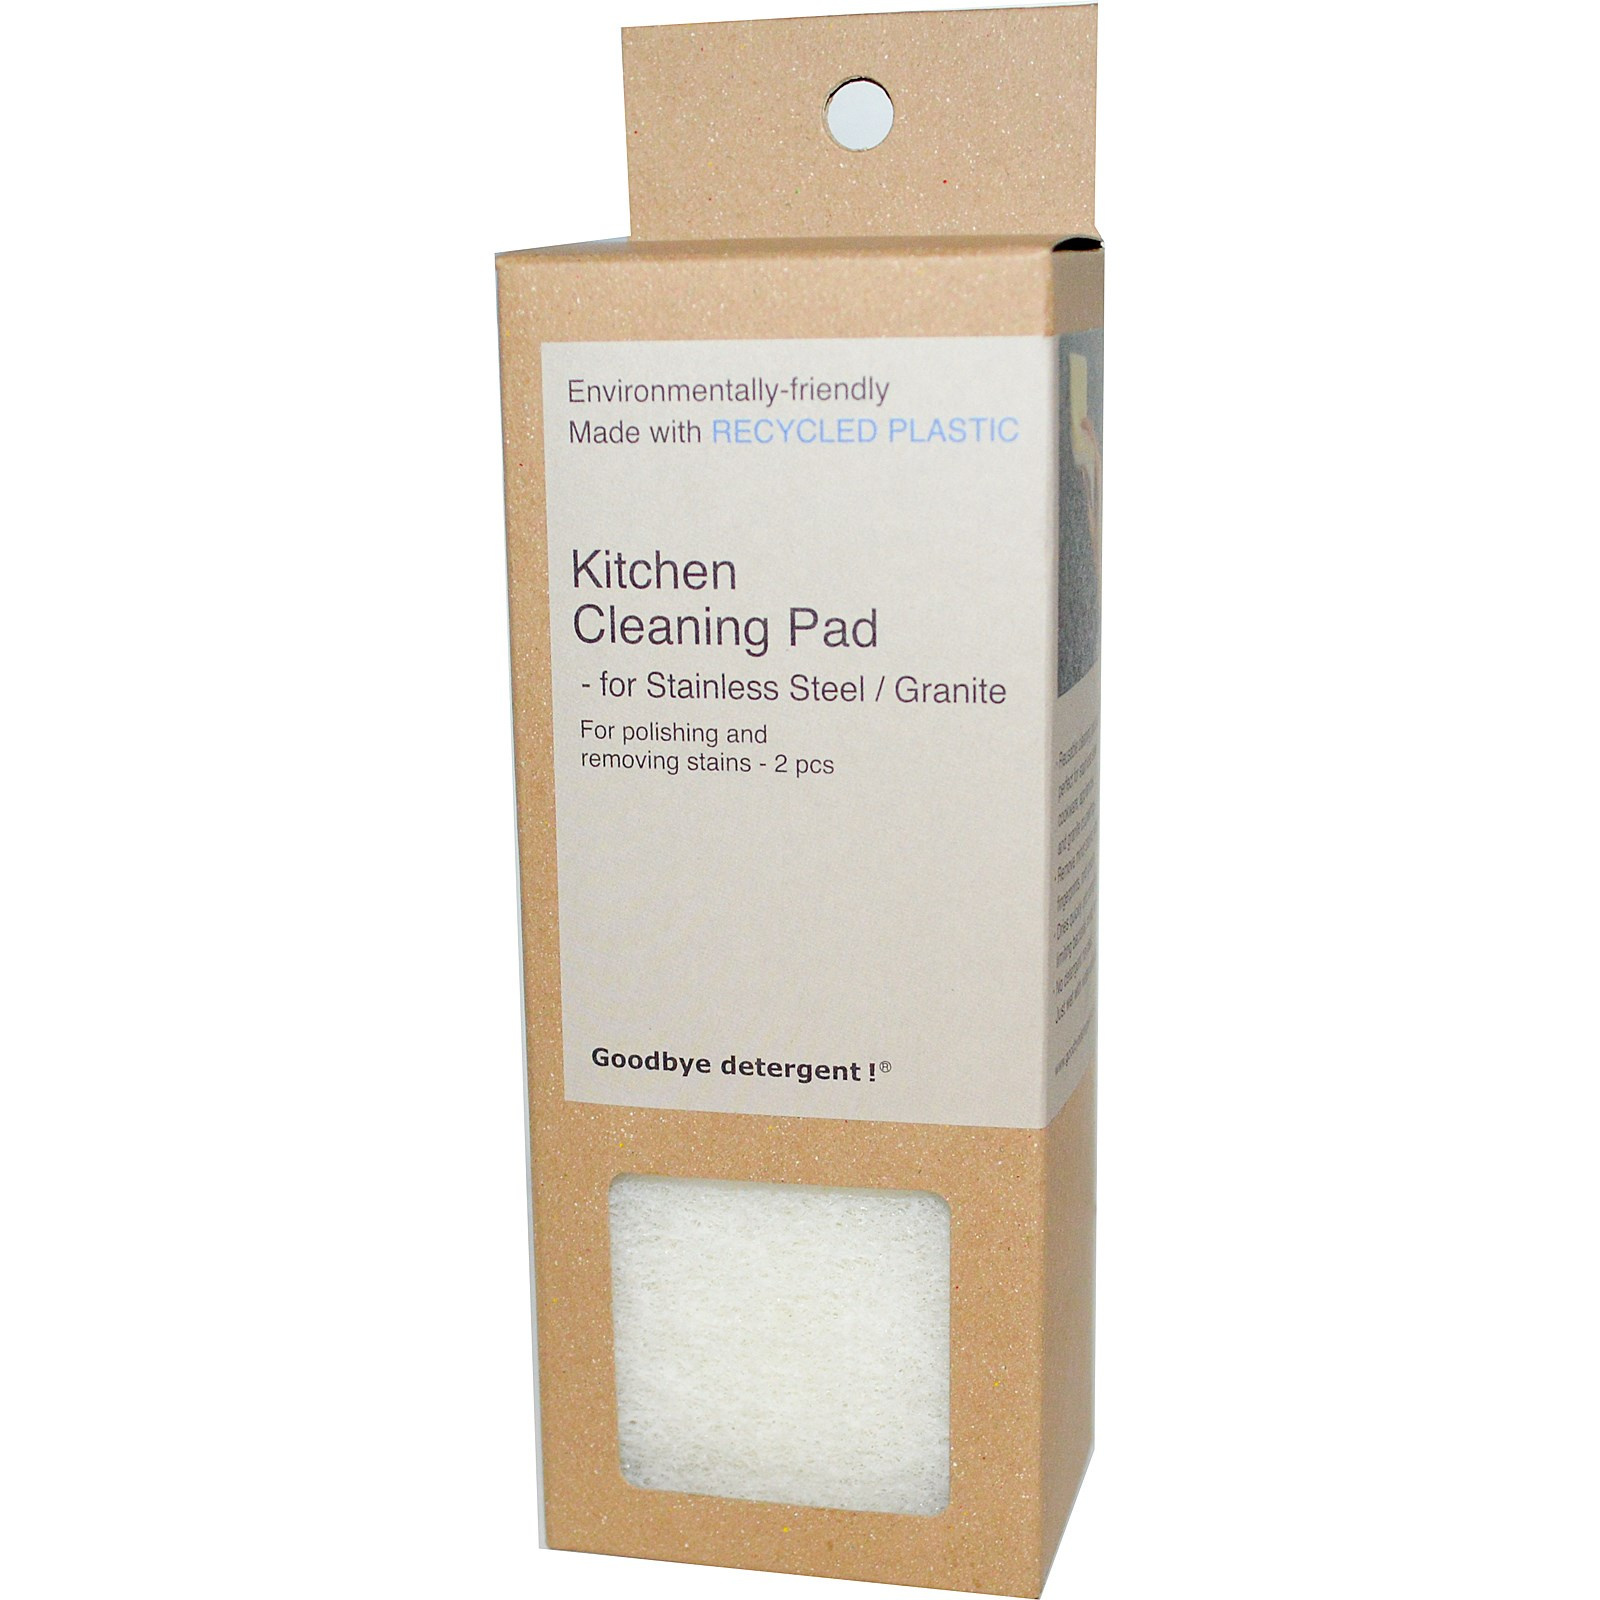    Kitchen Cleaning Pad Stainless Steel 2  (Goodbye Detergent! GBD201)